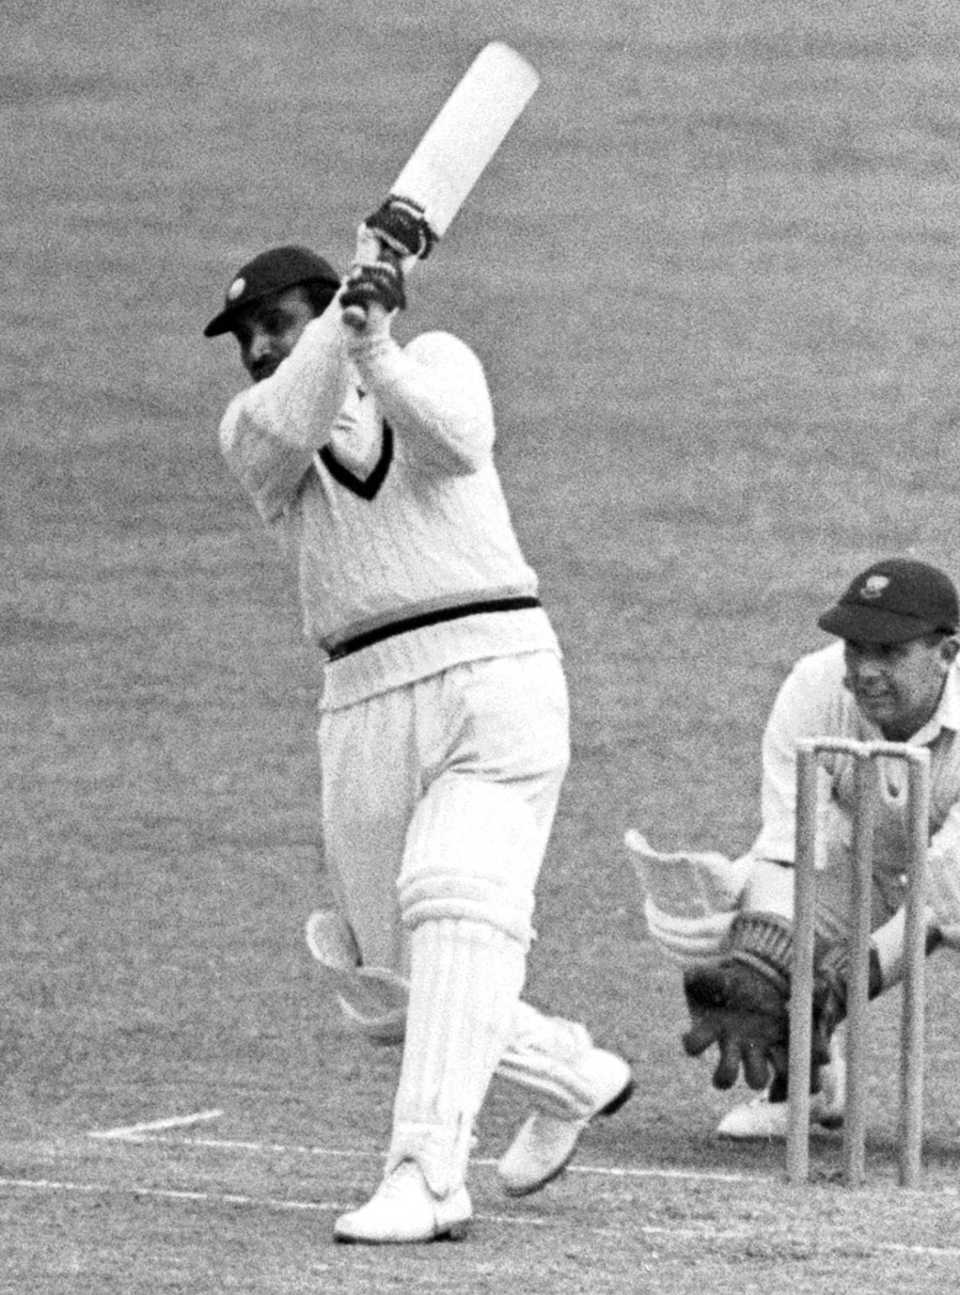 Vijay Merchant drives Anthony Mallett on his way to 148, MCC v Indians, 1st day, Lord's, May 25, 1946